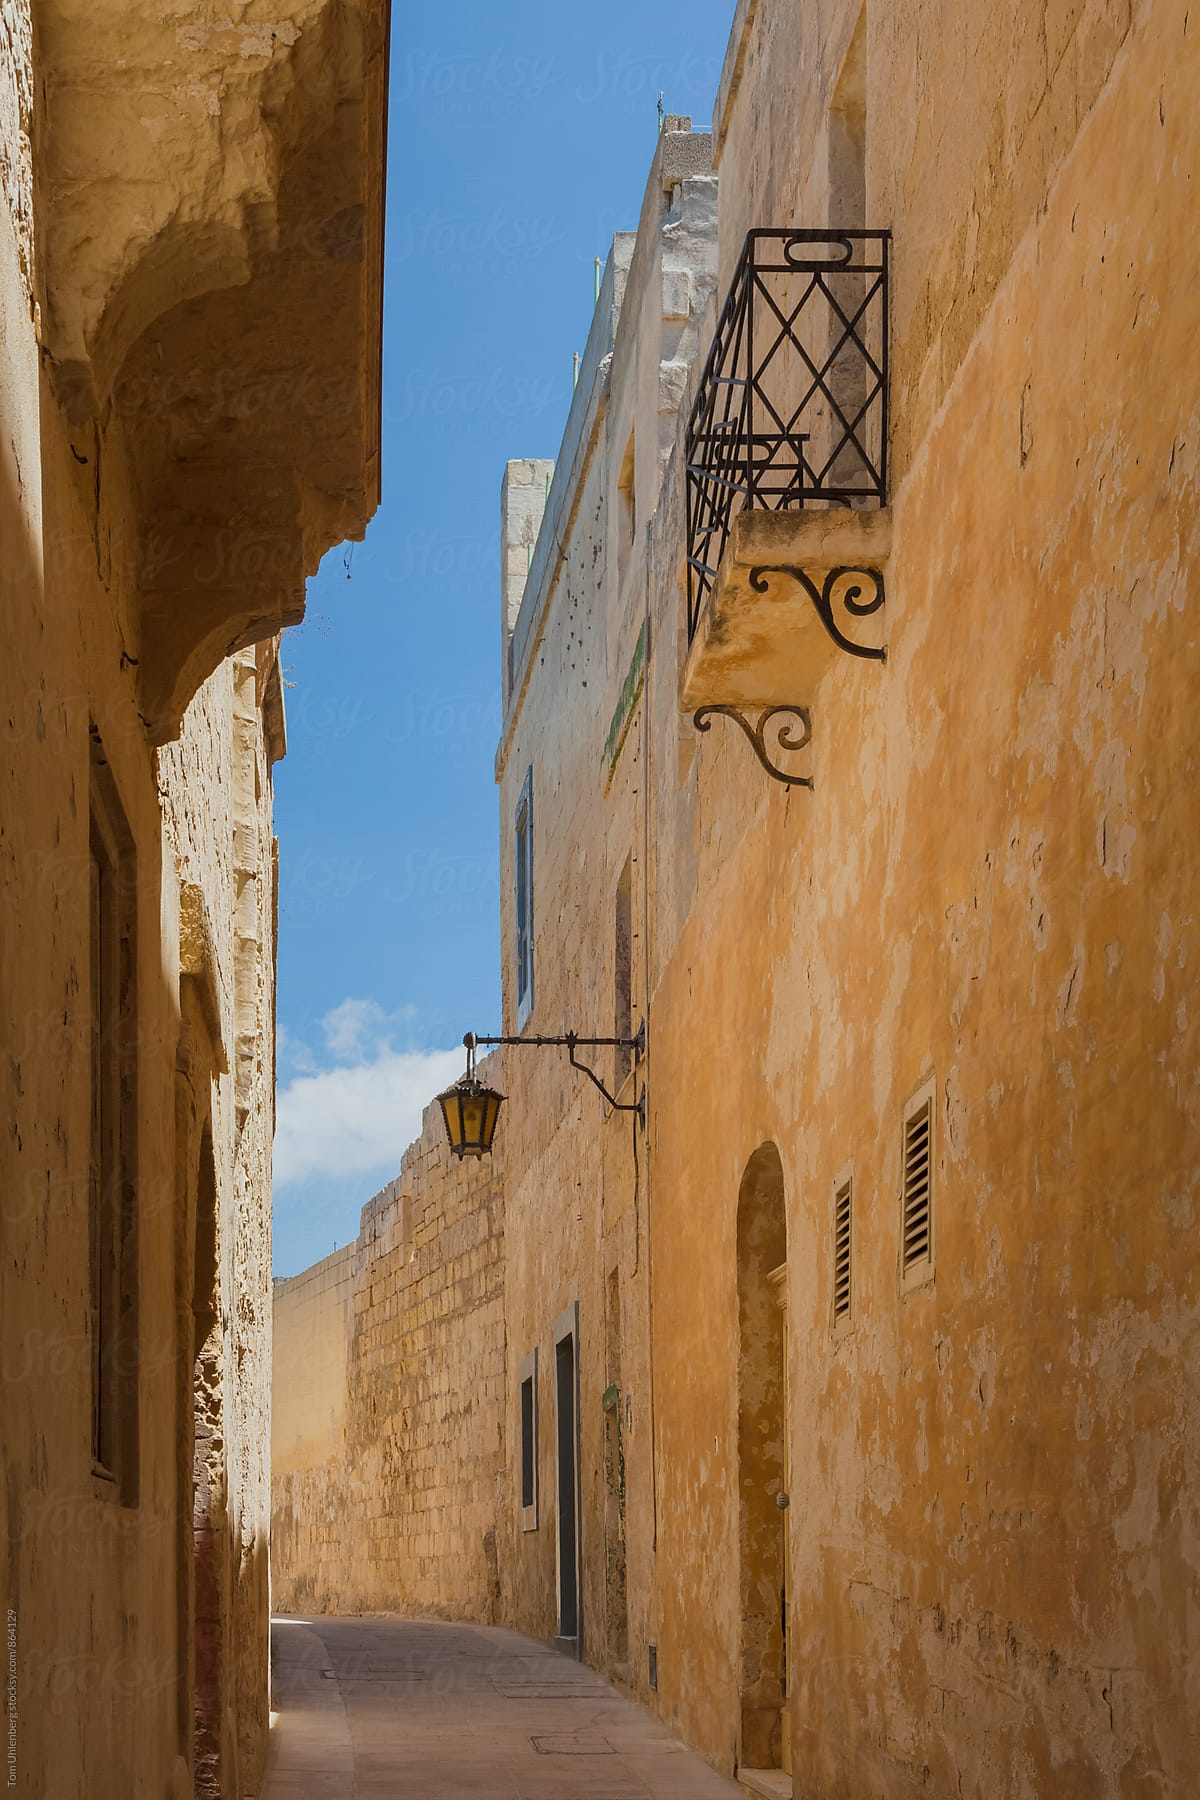 Typical Street in Mdina - former capital city of Malta